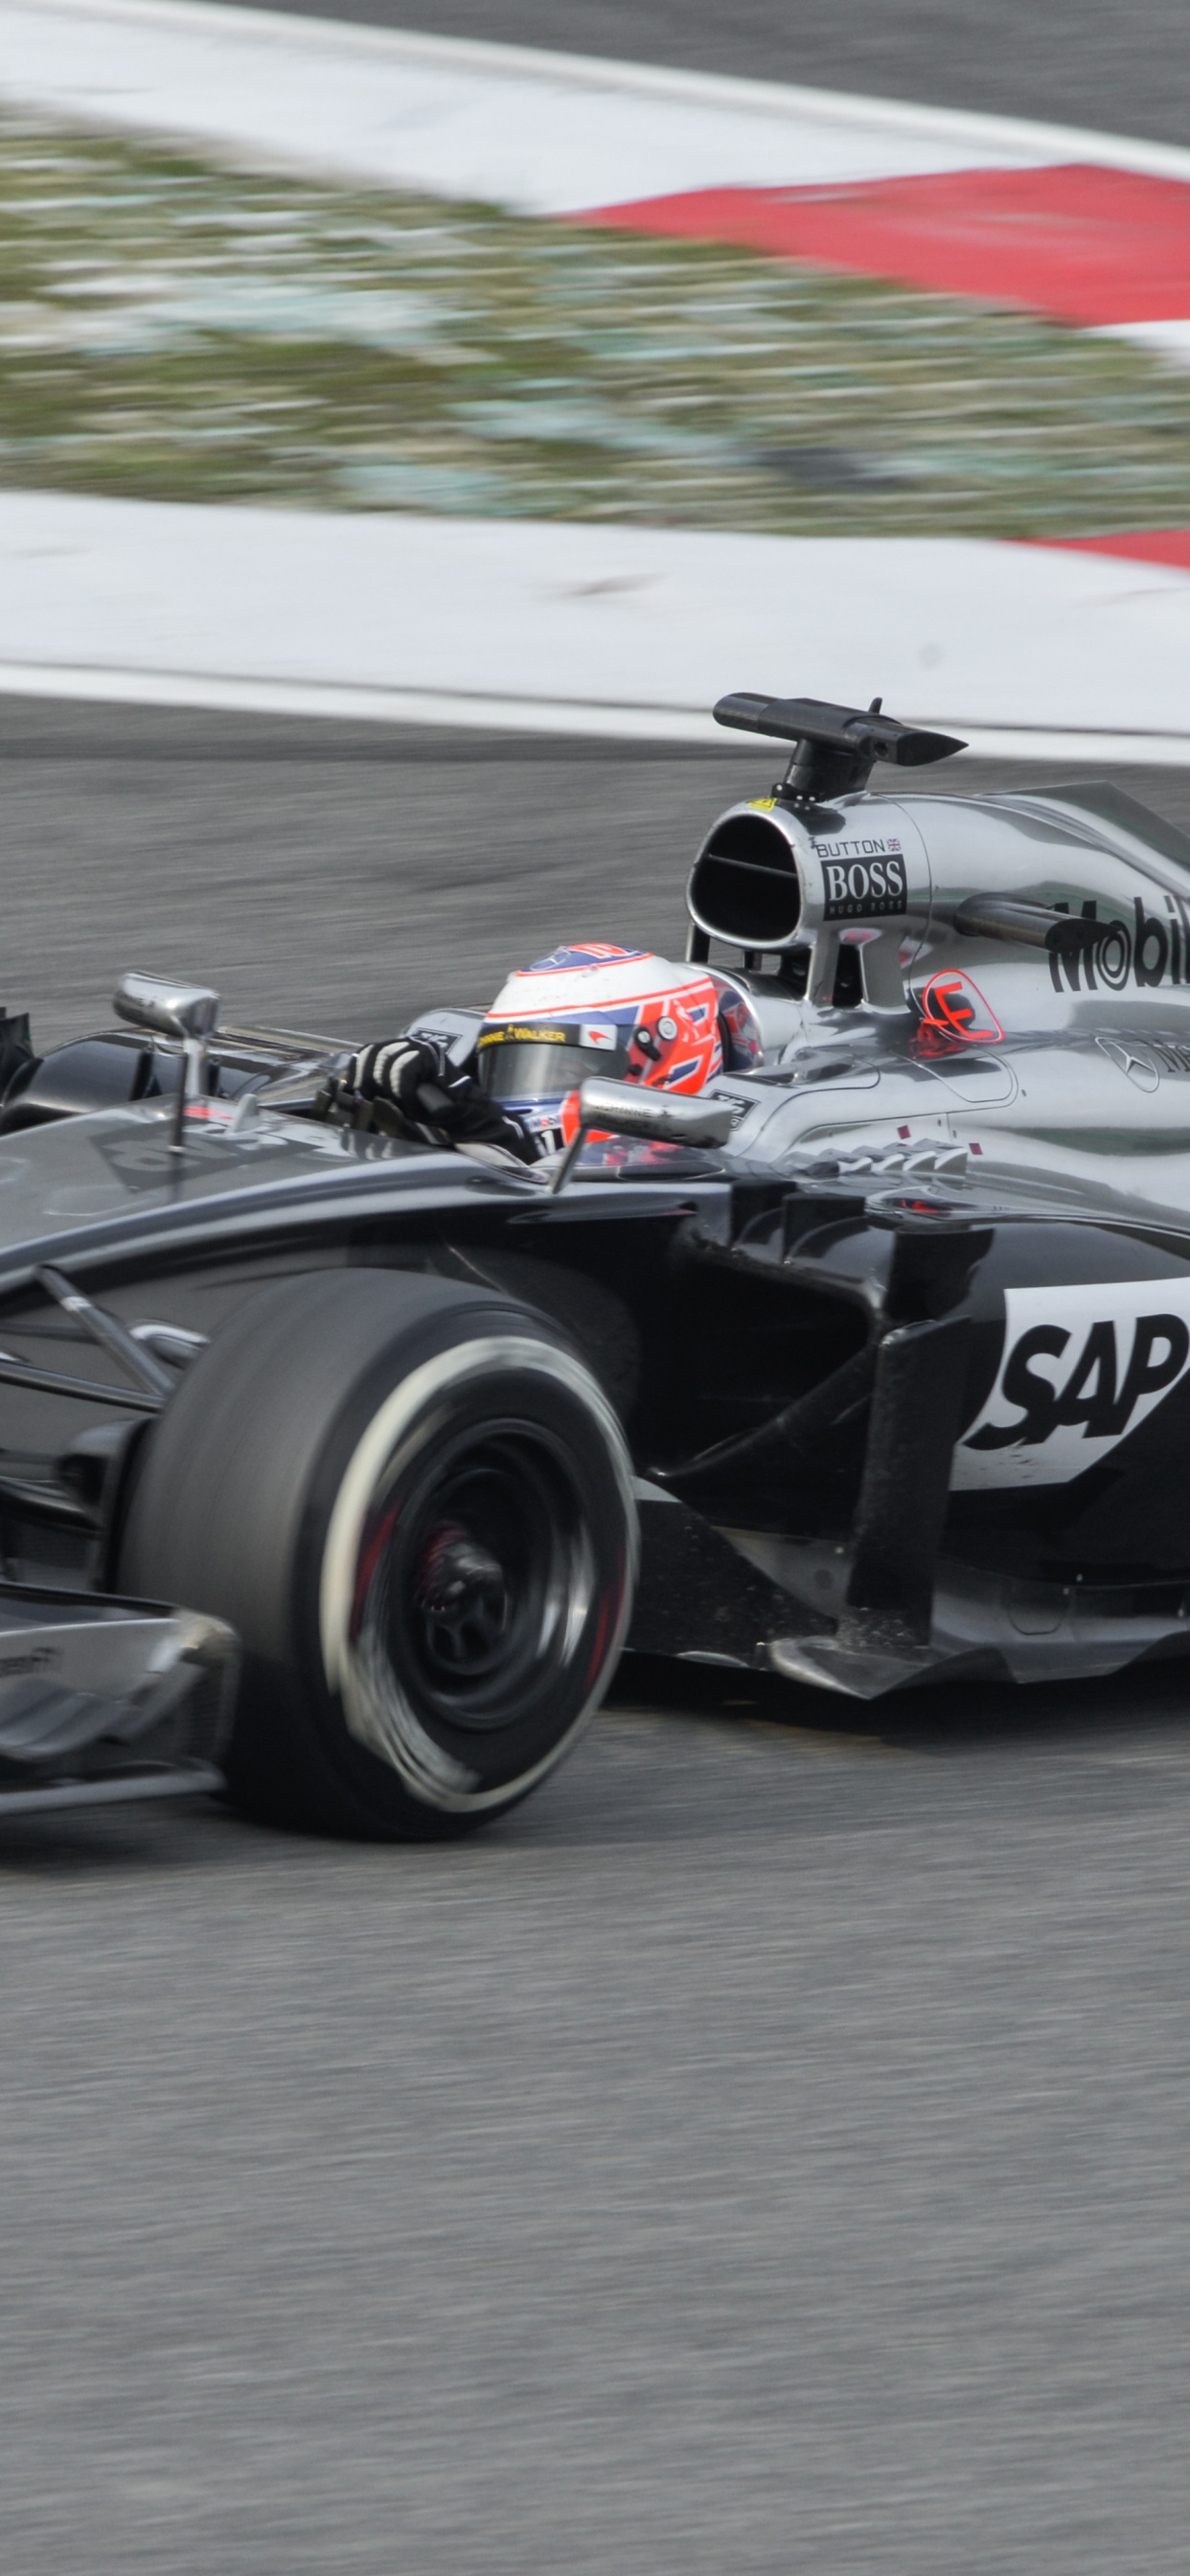 Black and White f 1 Car on Gray Asphalt Road. Wallpaper in 1242x2688 Resolution